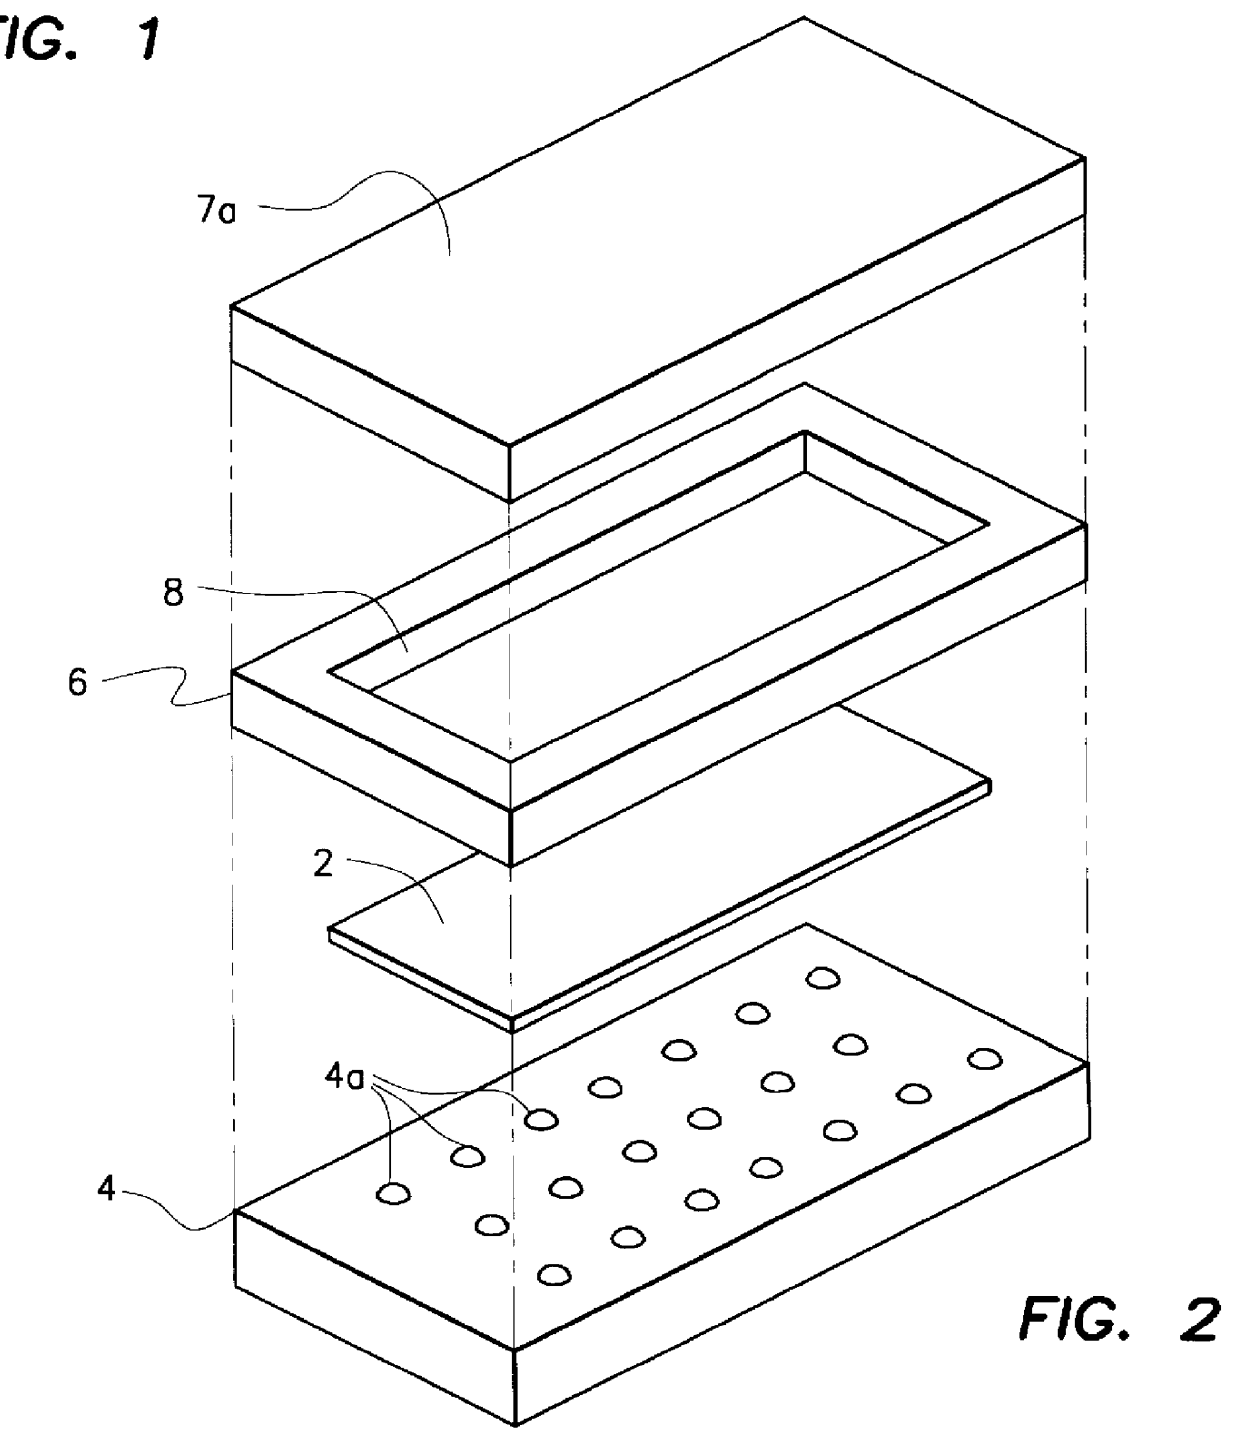 Fine pitch contact device employing a compliant conductive polymer bump